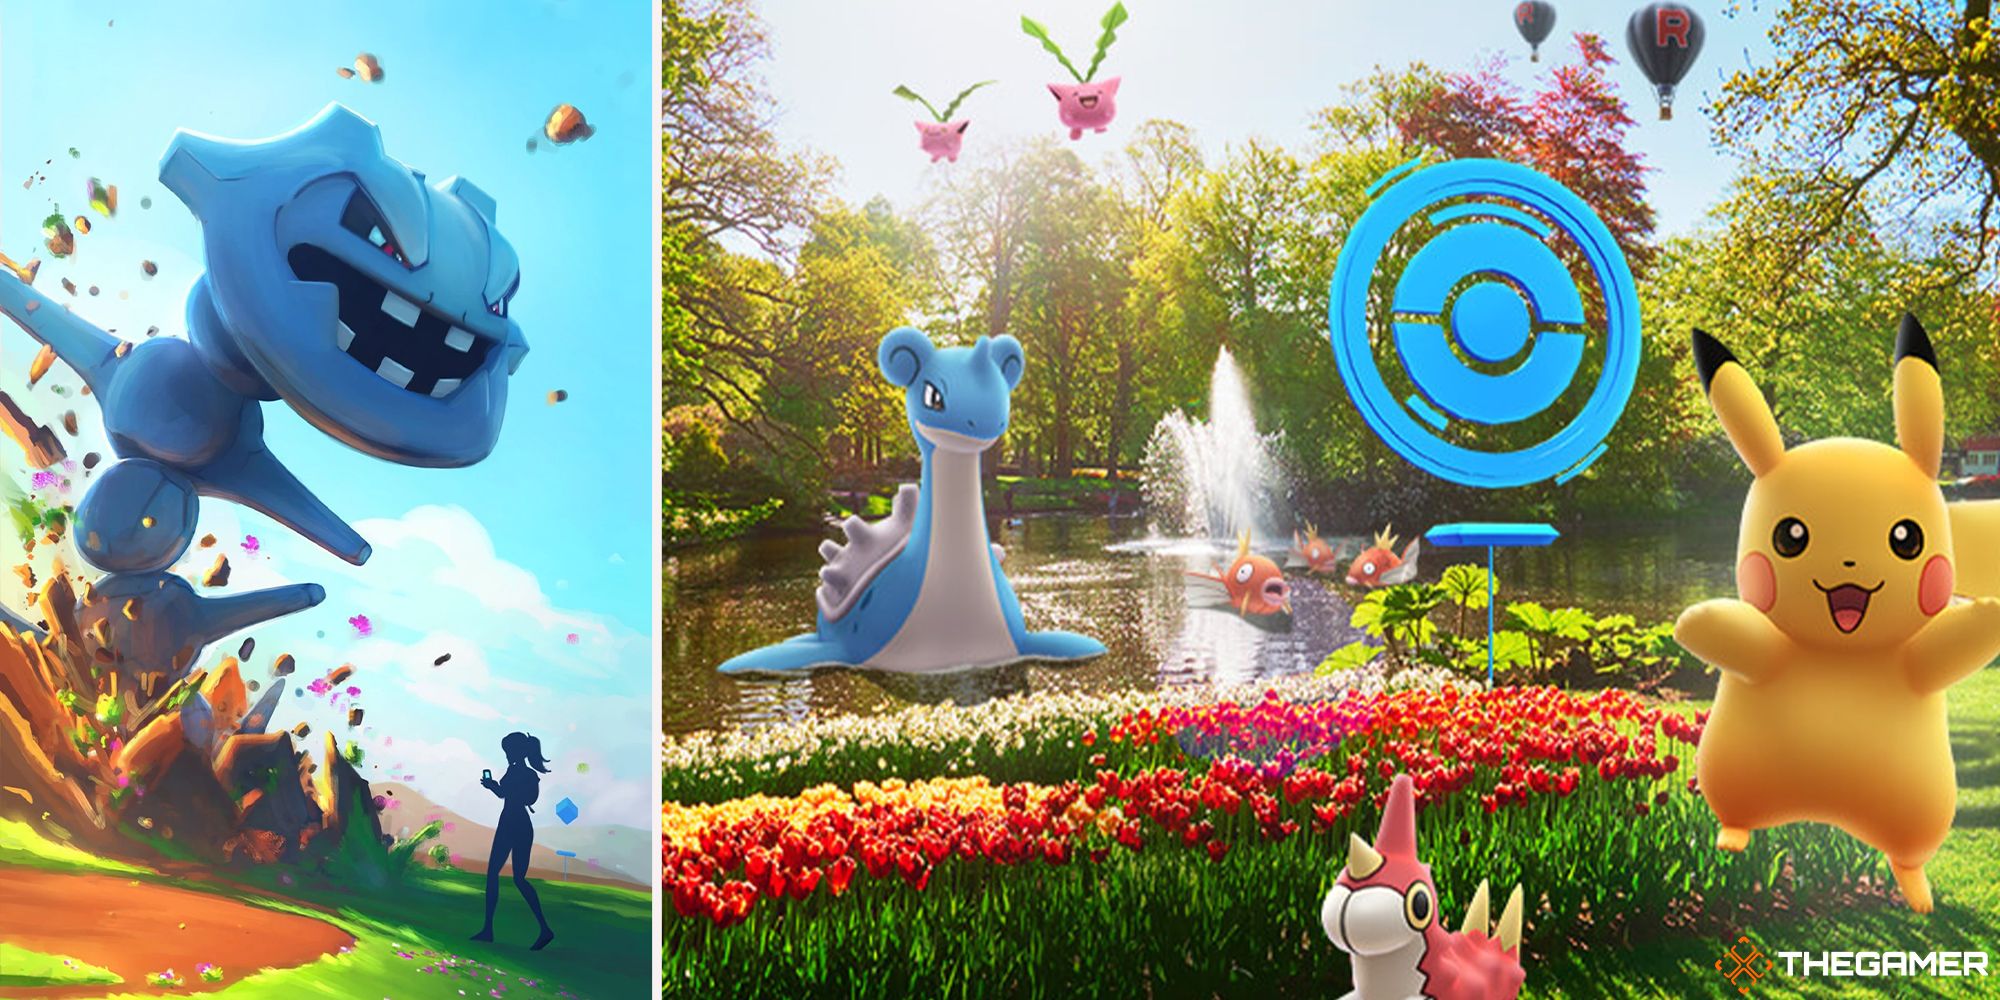 Pokémon Go - Spring Loading Screens and Promotional Art